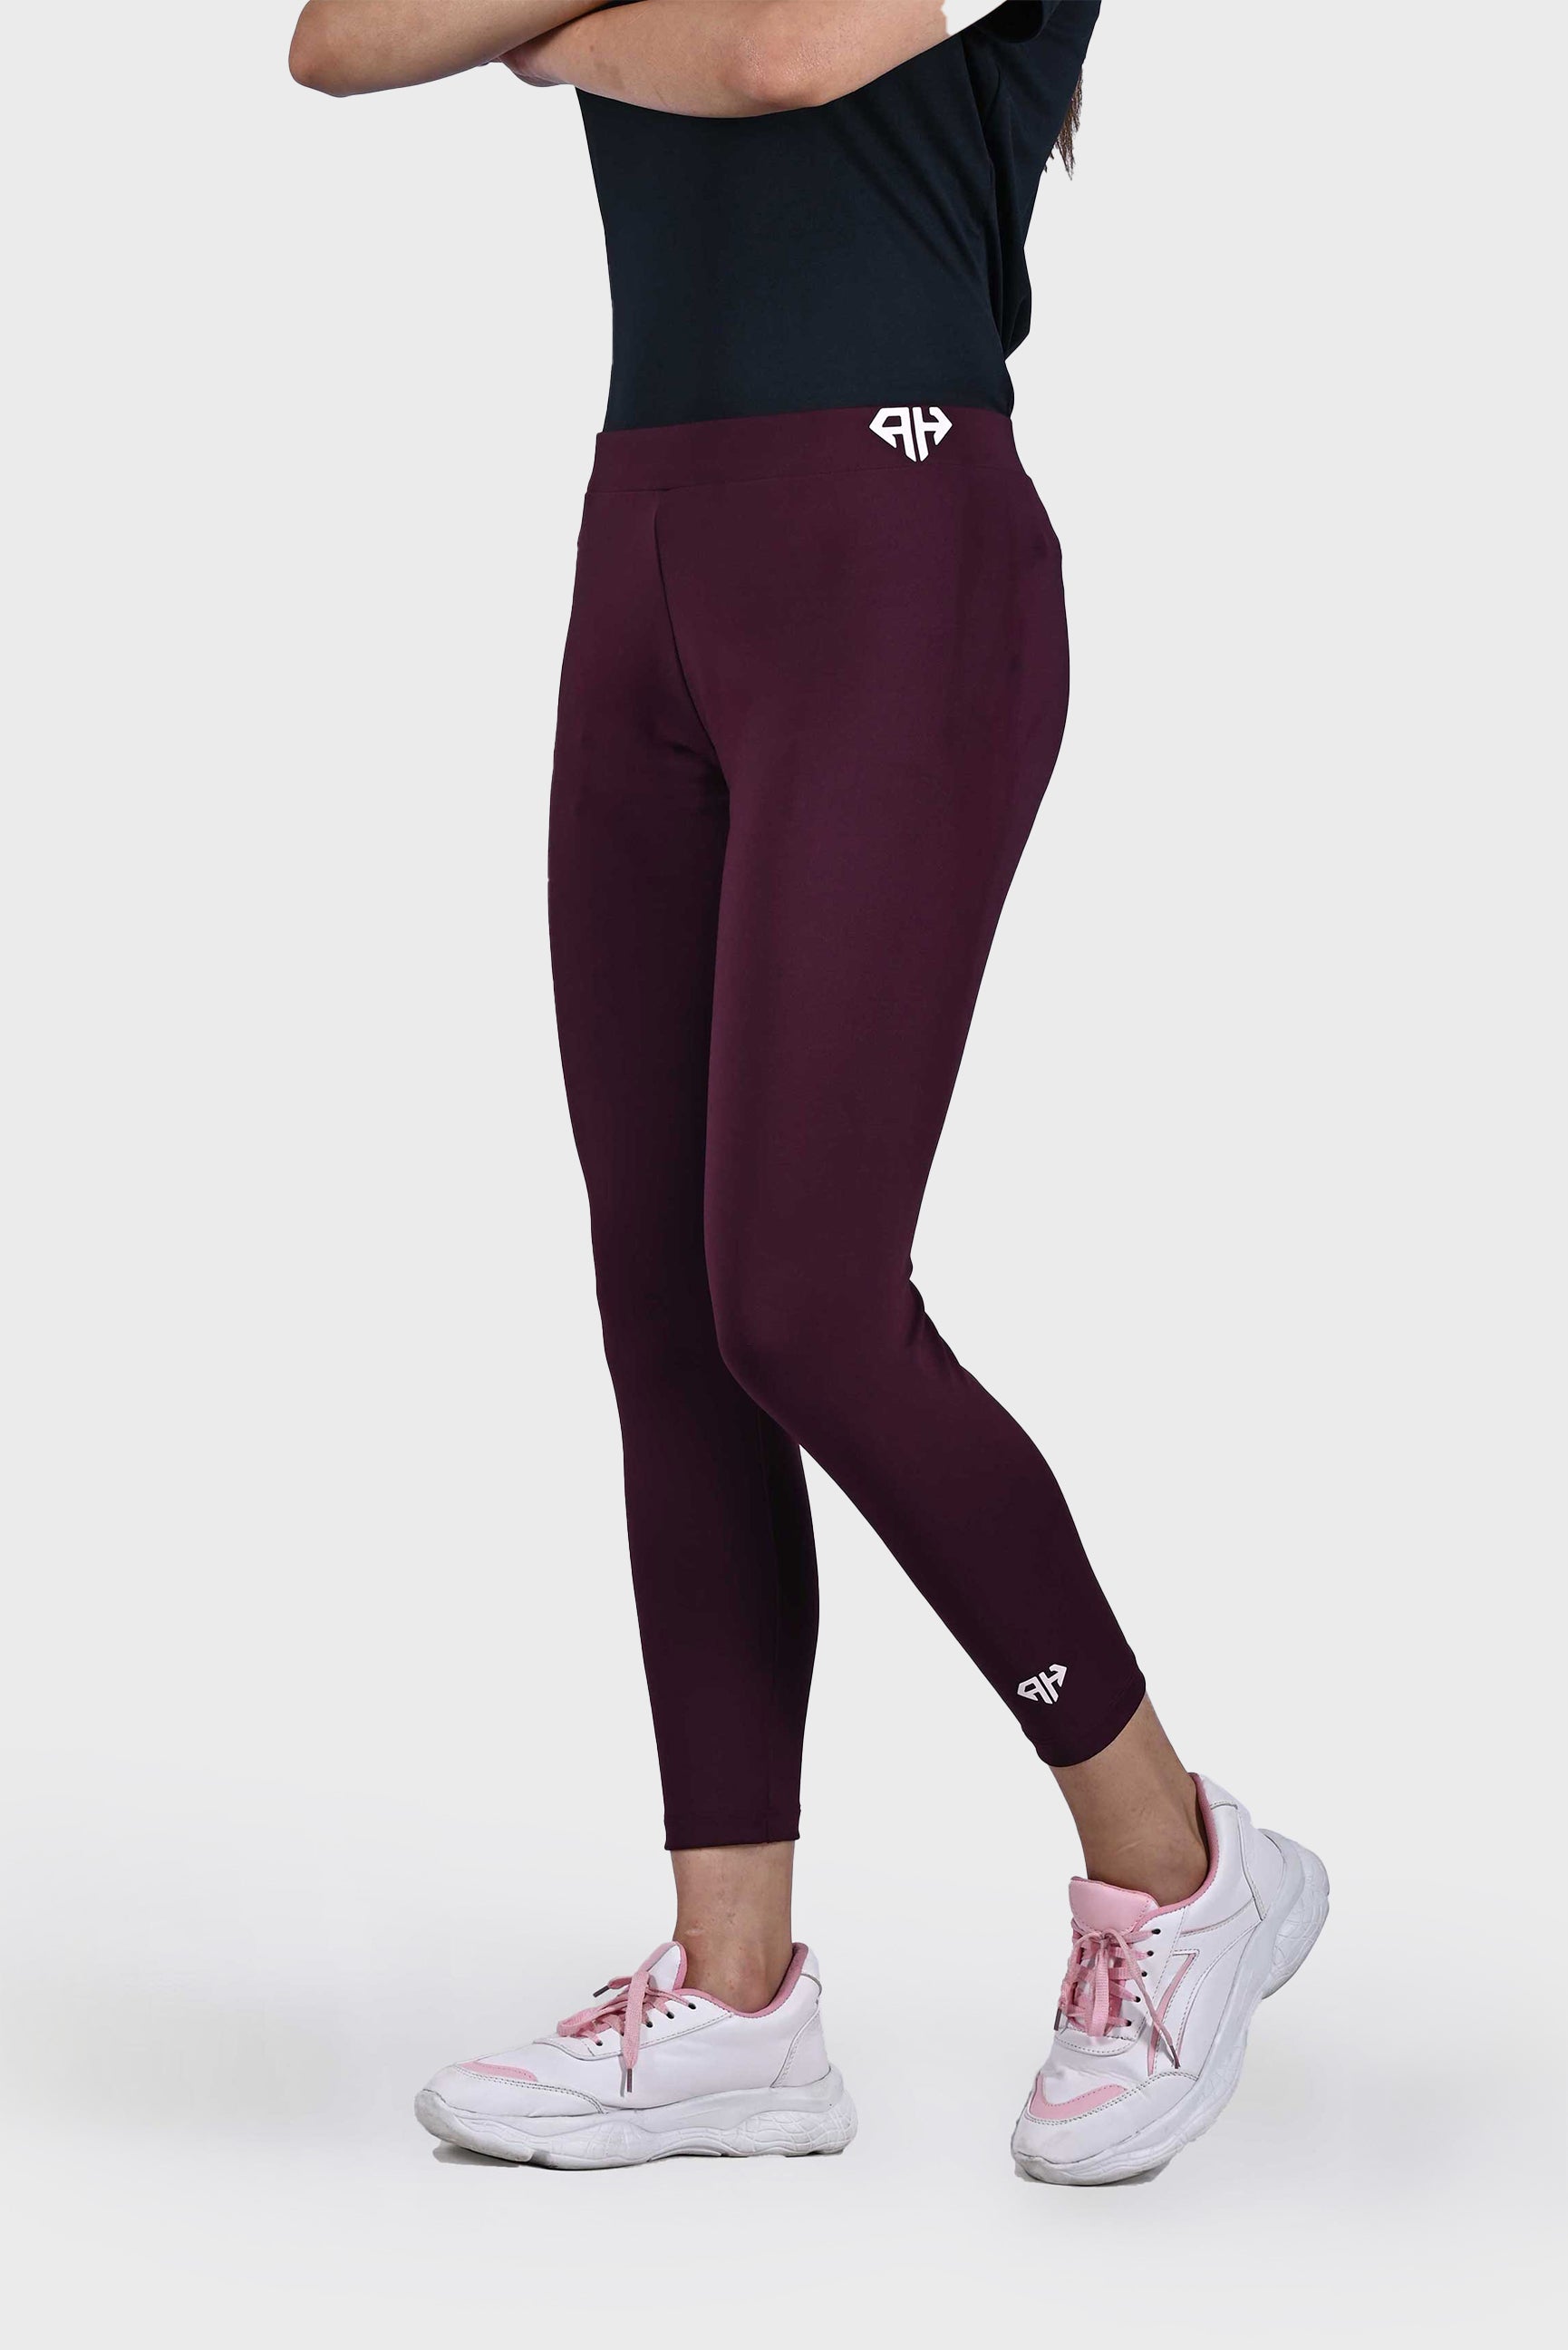 Burgundy Plain Sex Yoga Pants for Women Outfits Athletic Pants for Women  with Pockets X-Small at Amazon Women's Clothing store